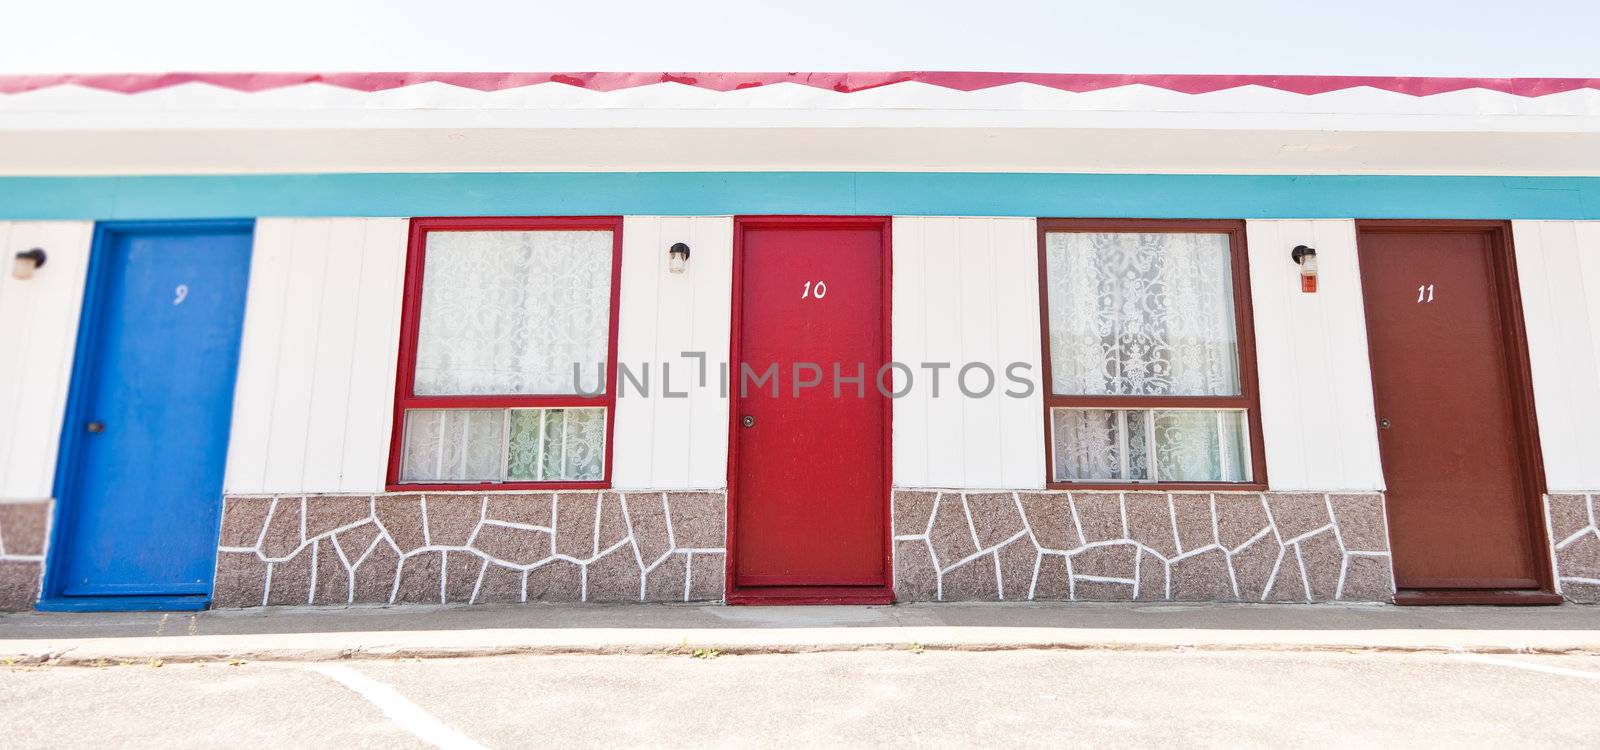 Motel with red and blue doors by aetb